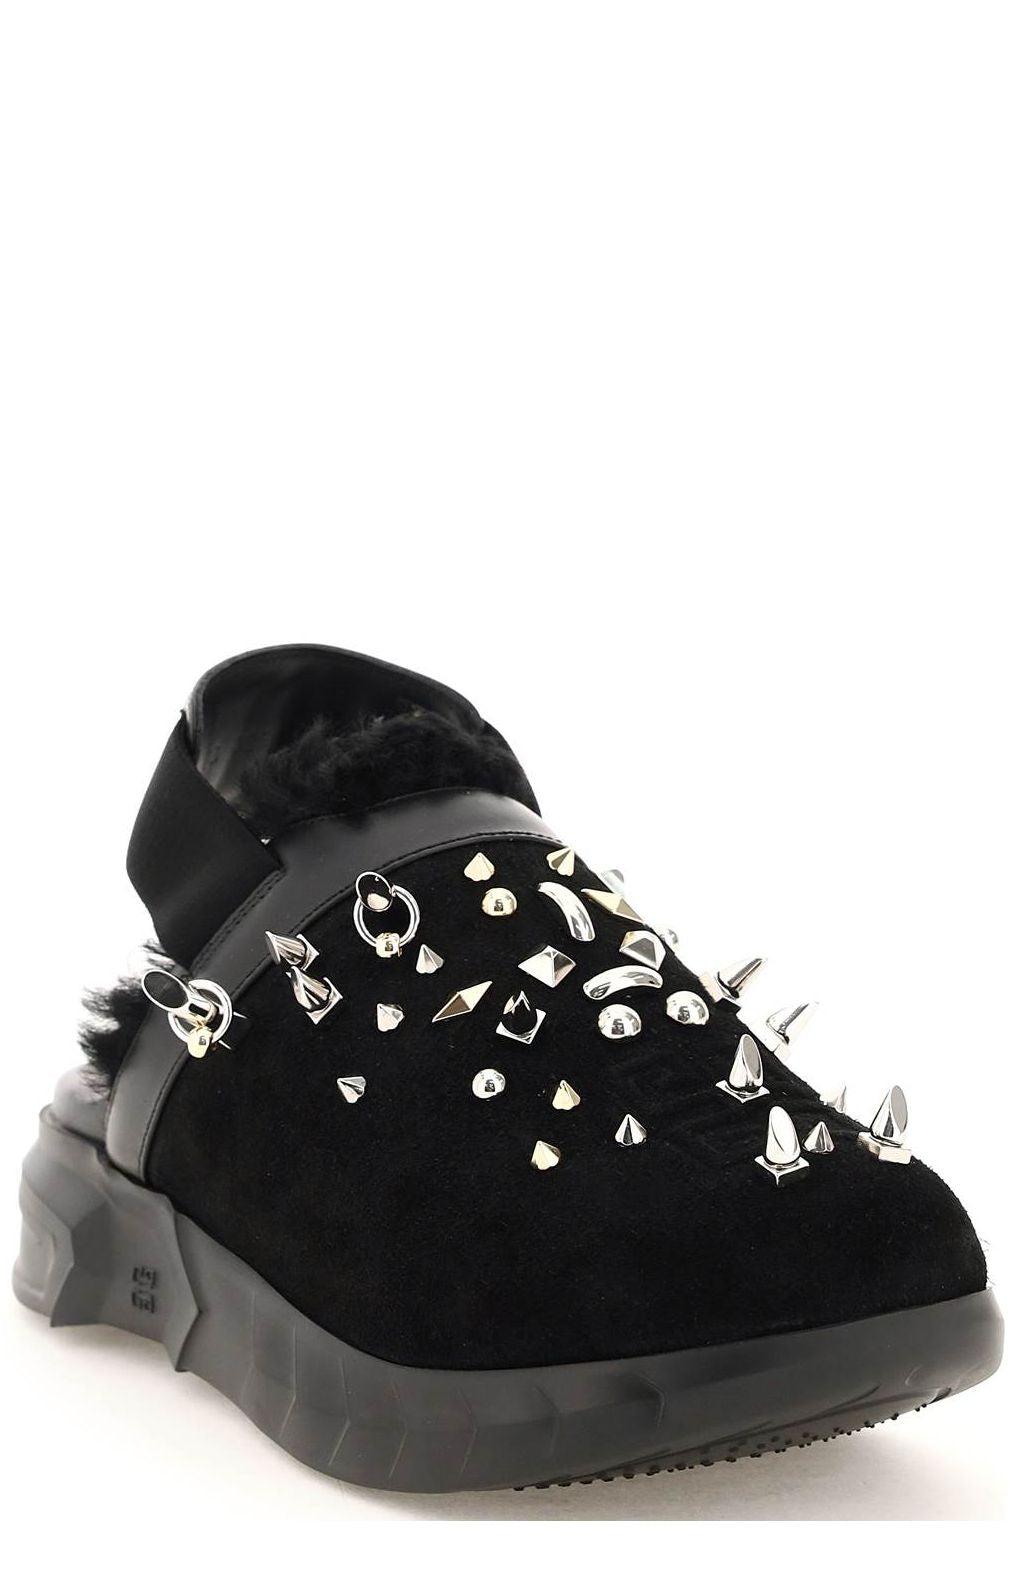 Givenchy Marshmallow Studded Sandals in Black | Lyst